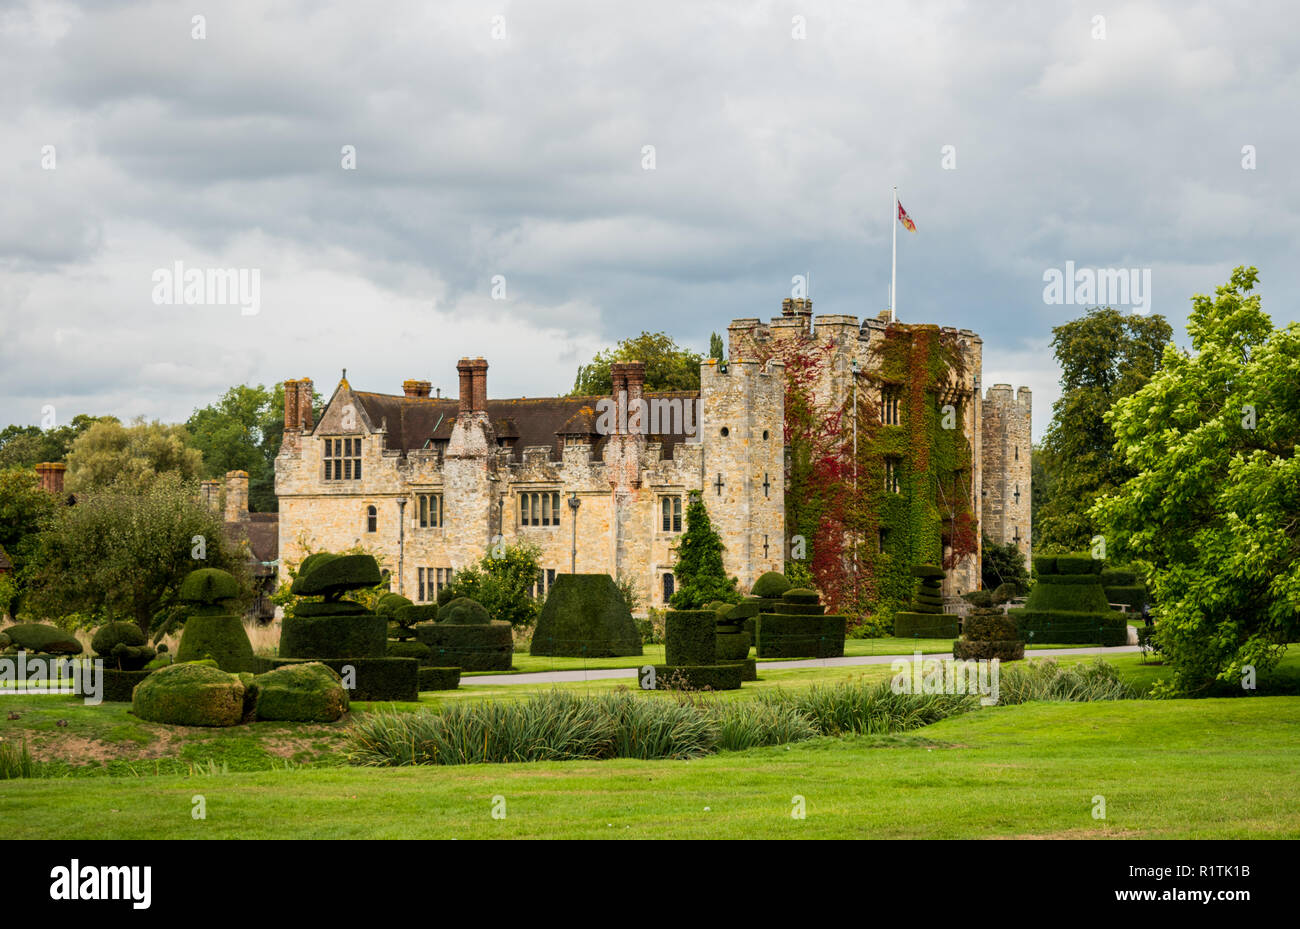 HEVER CASTLE, ENGLAND, UK – SEPTEMBER 08 2018: View of Hever Castle and its topiary garden on a cloudy day, with a flag flying at full mast. Stock Photo